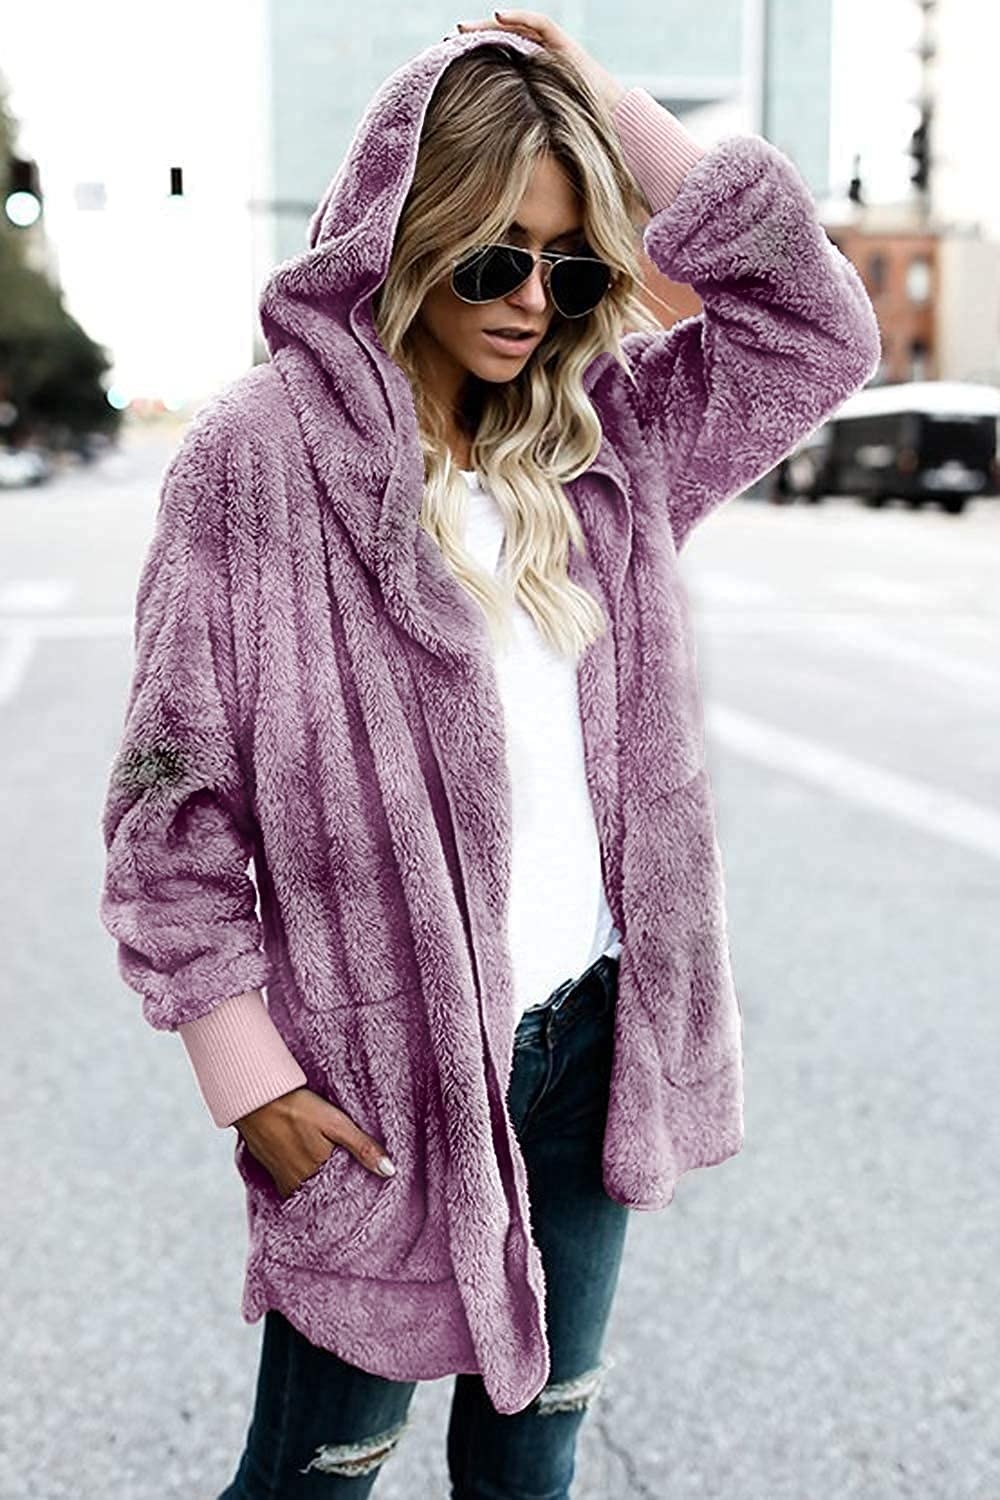 a person wearing the fuzzy cardigan